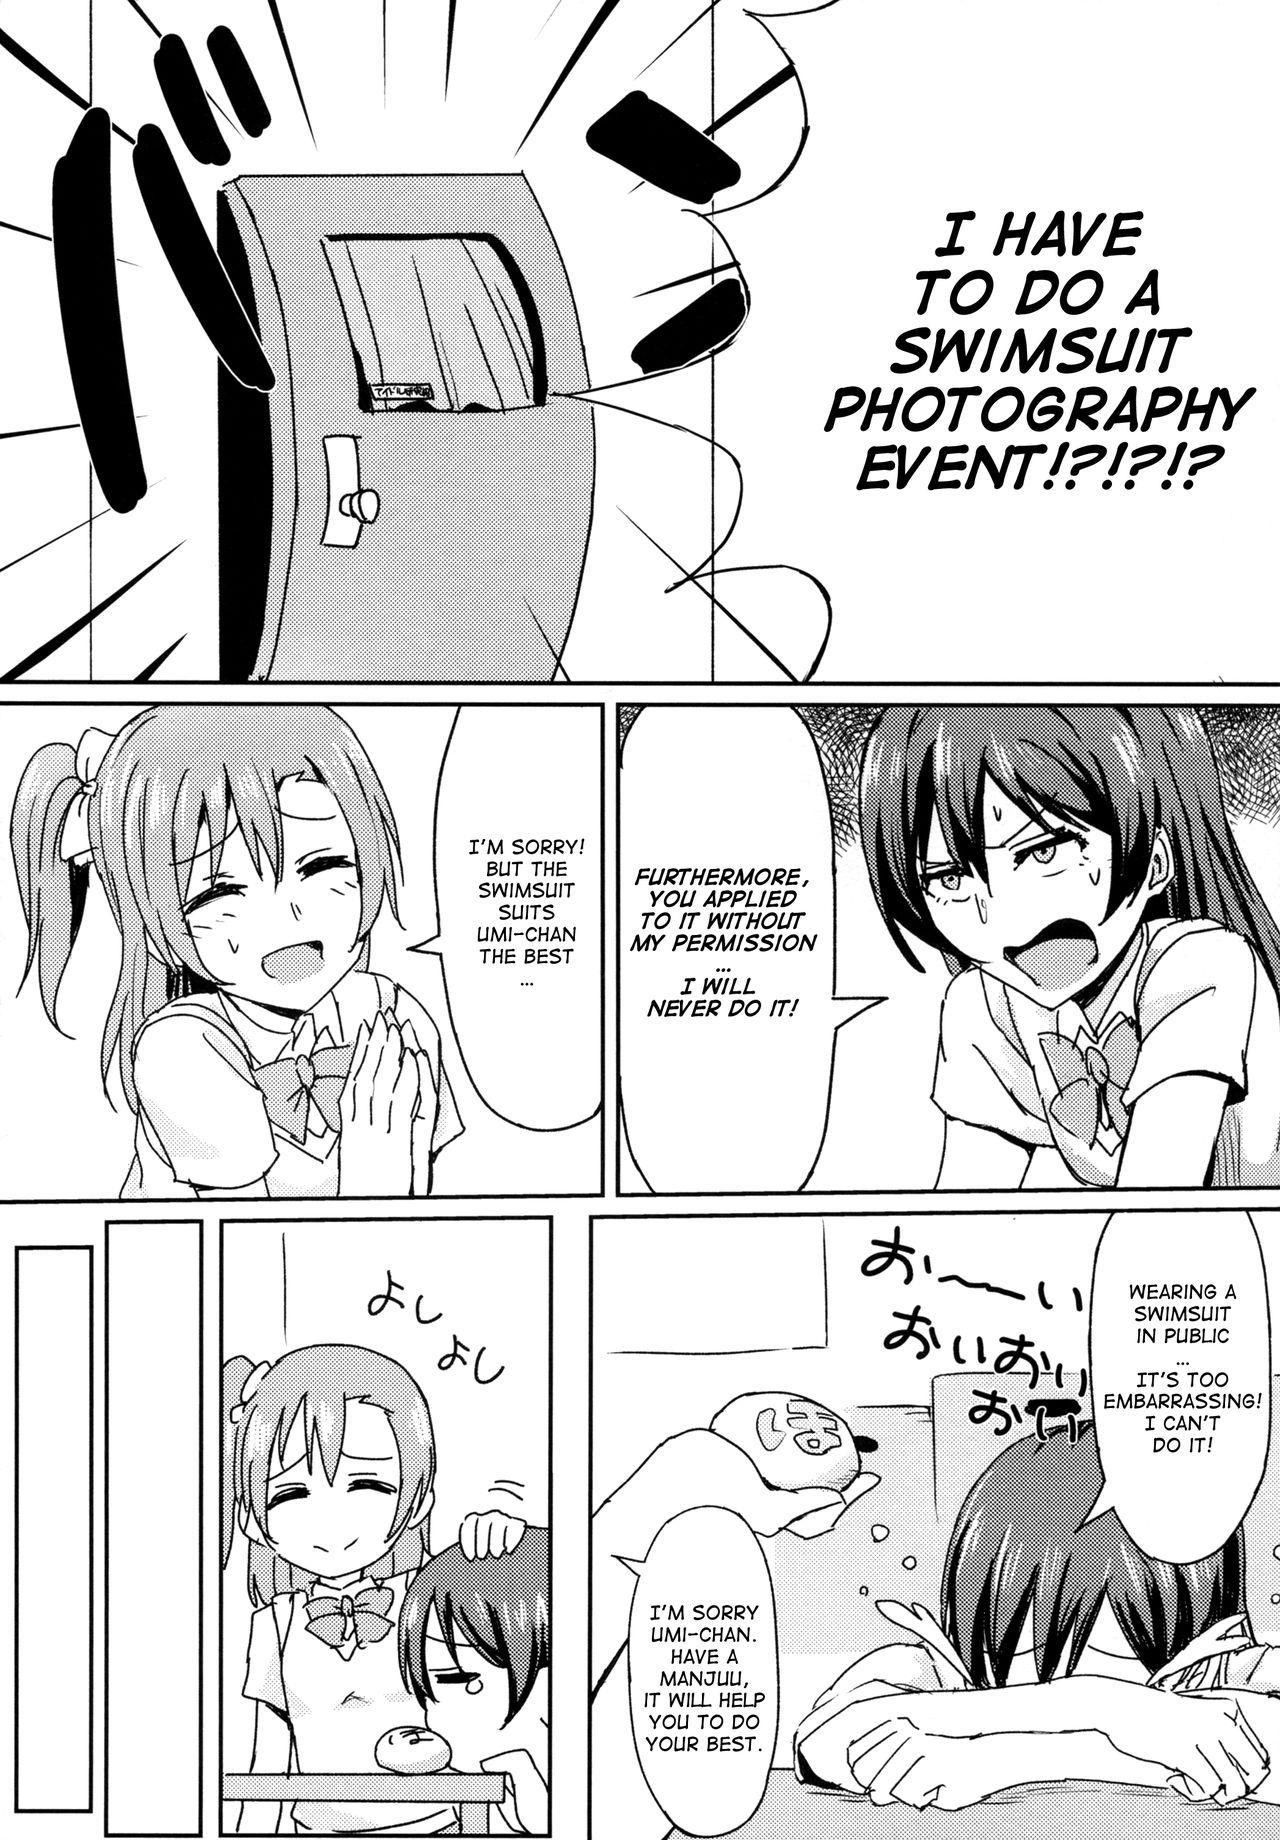 Semen Hah,Wrench This! - Love live Funny - Page 5